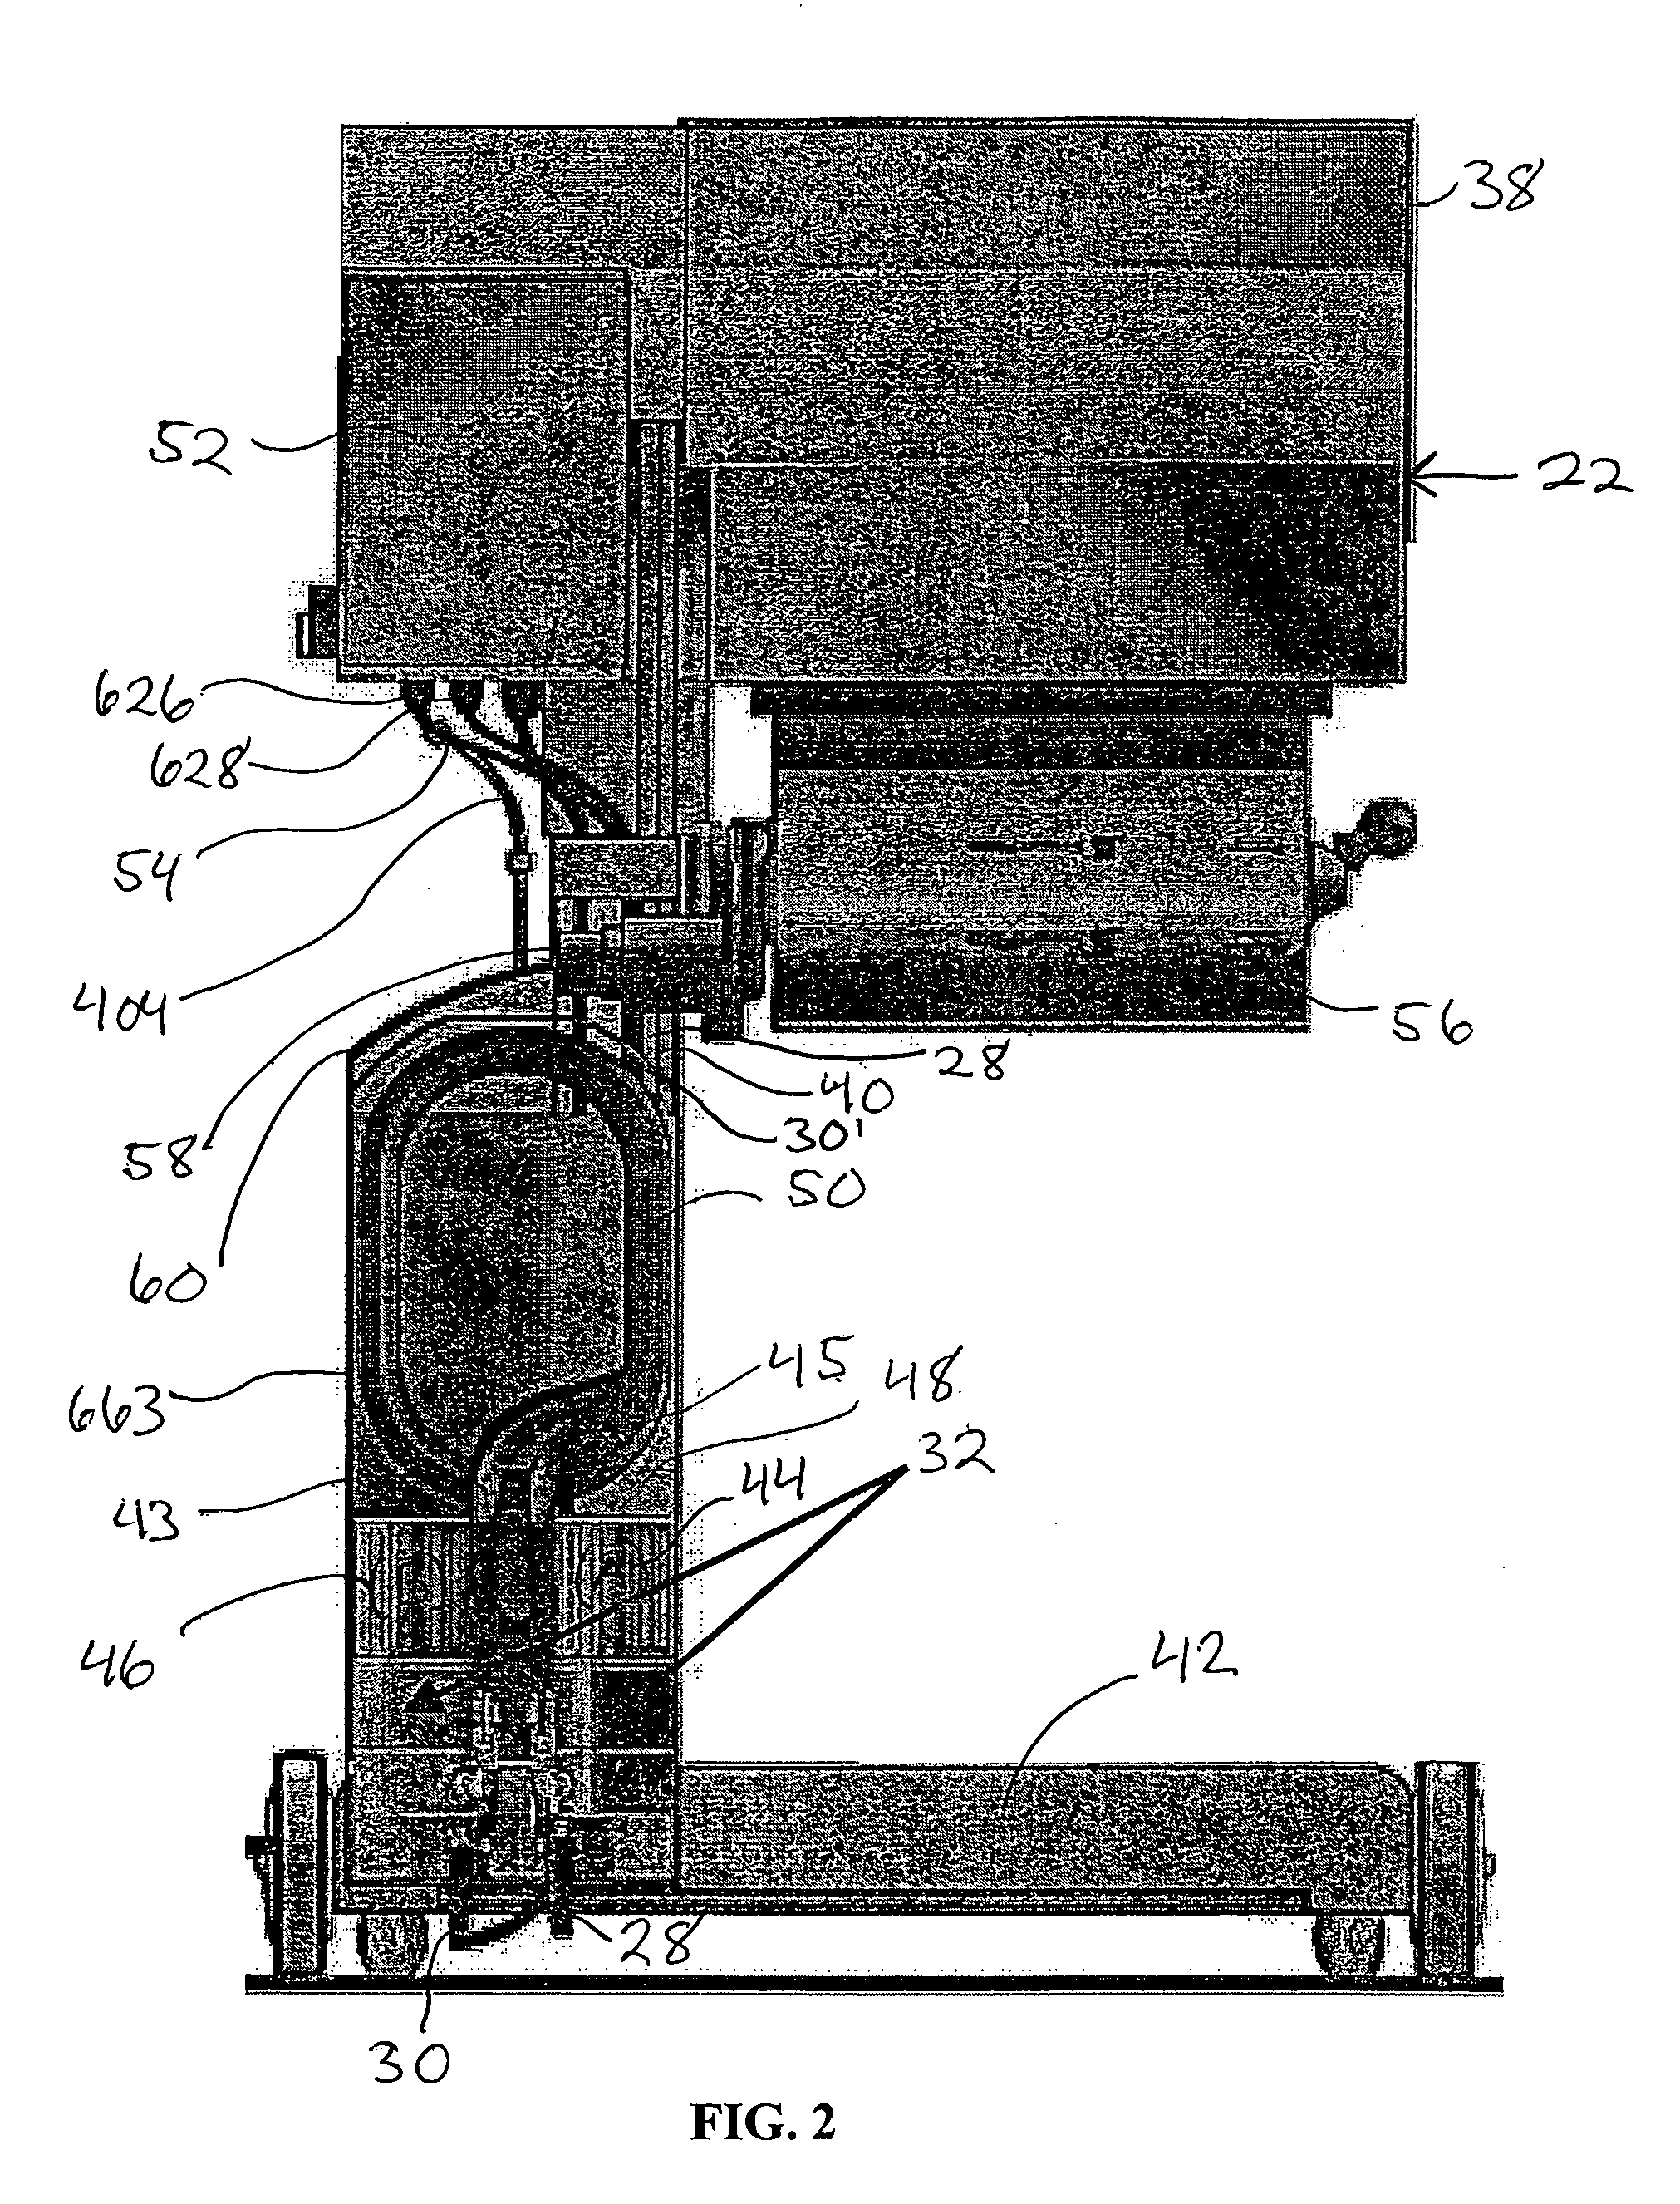 Dispensing system with end sealer assembly and method of manufacturing and using same